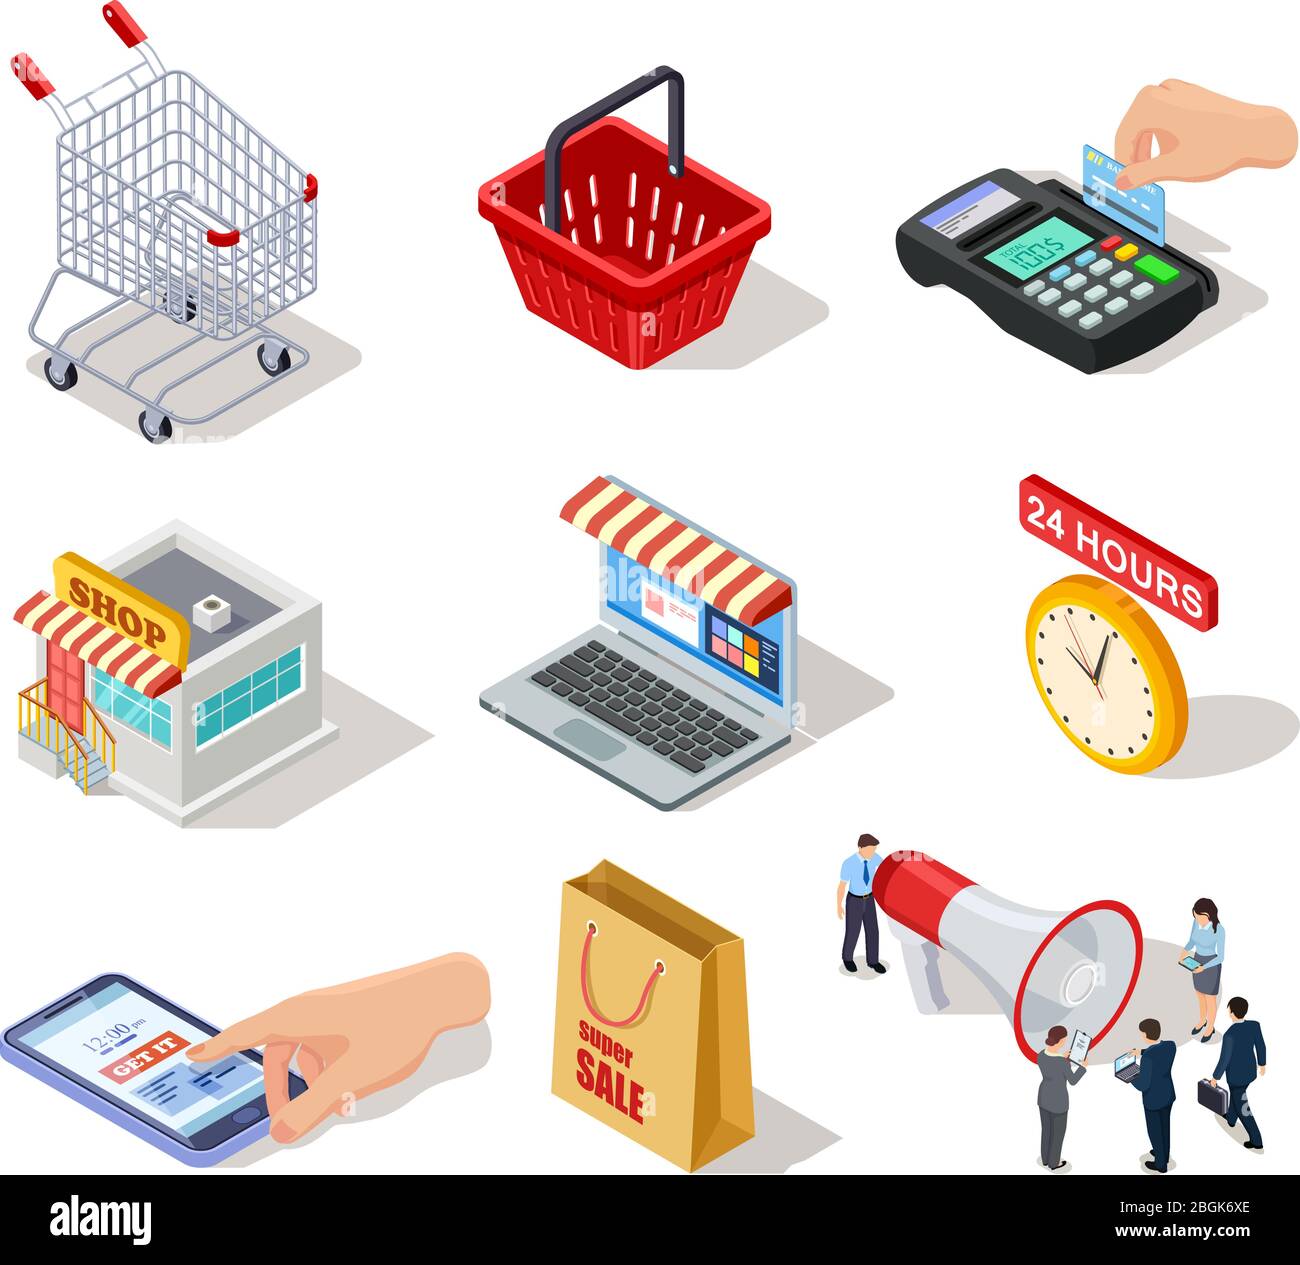 Isometric shopping icons. Ecommerce store, online shop and internet purchasing 3d vector marketing symbols. Web online sale, cart and laptop Stock Vector